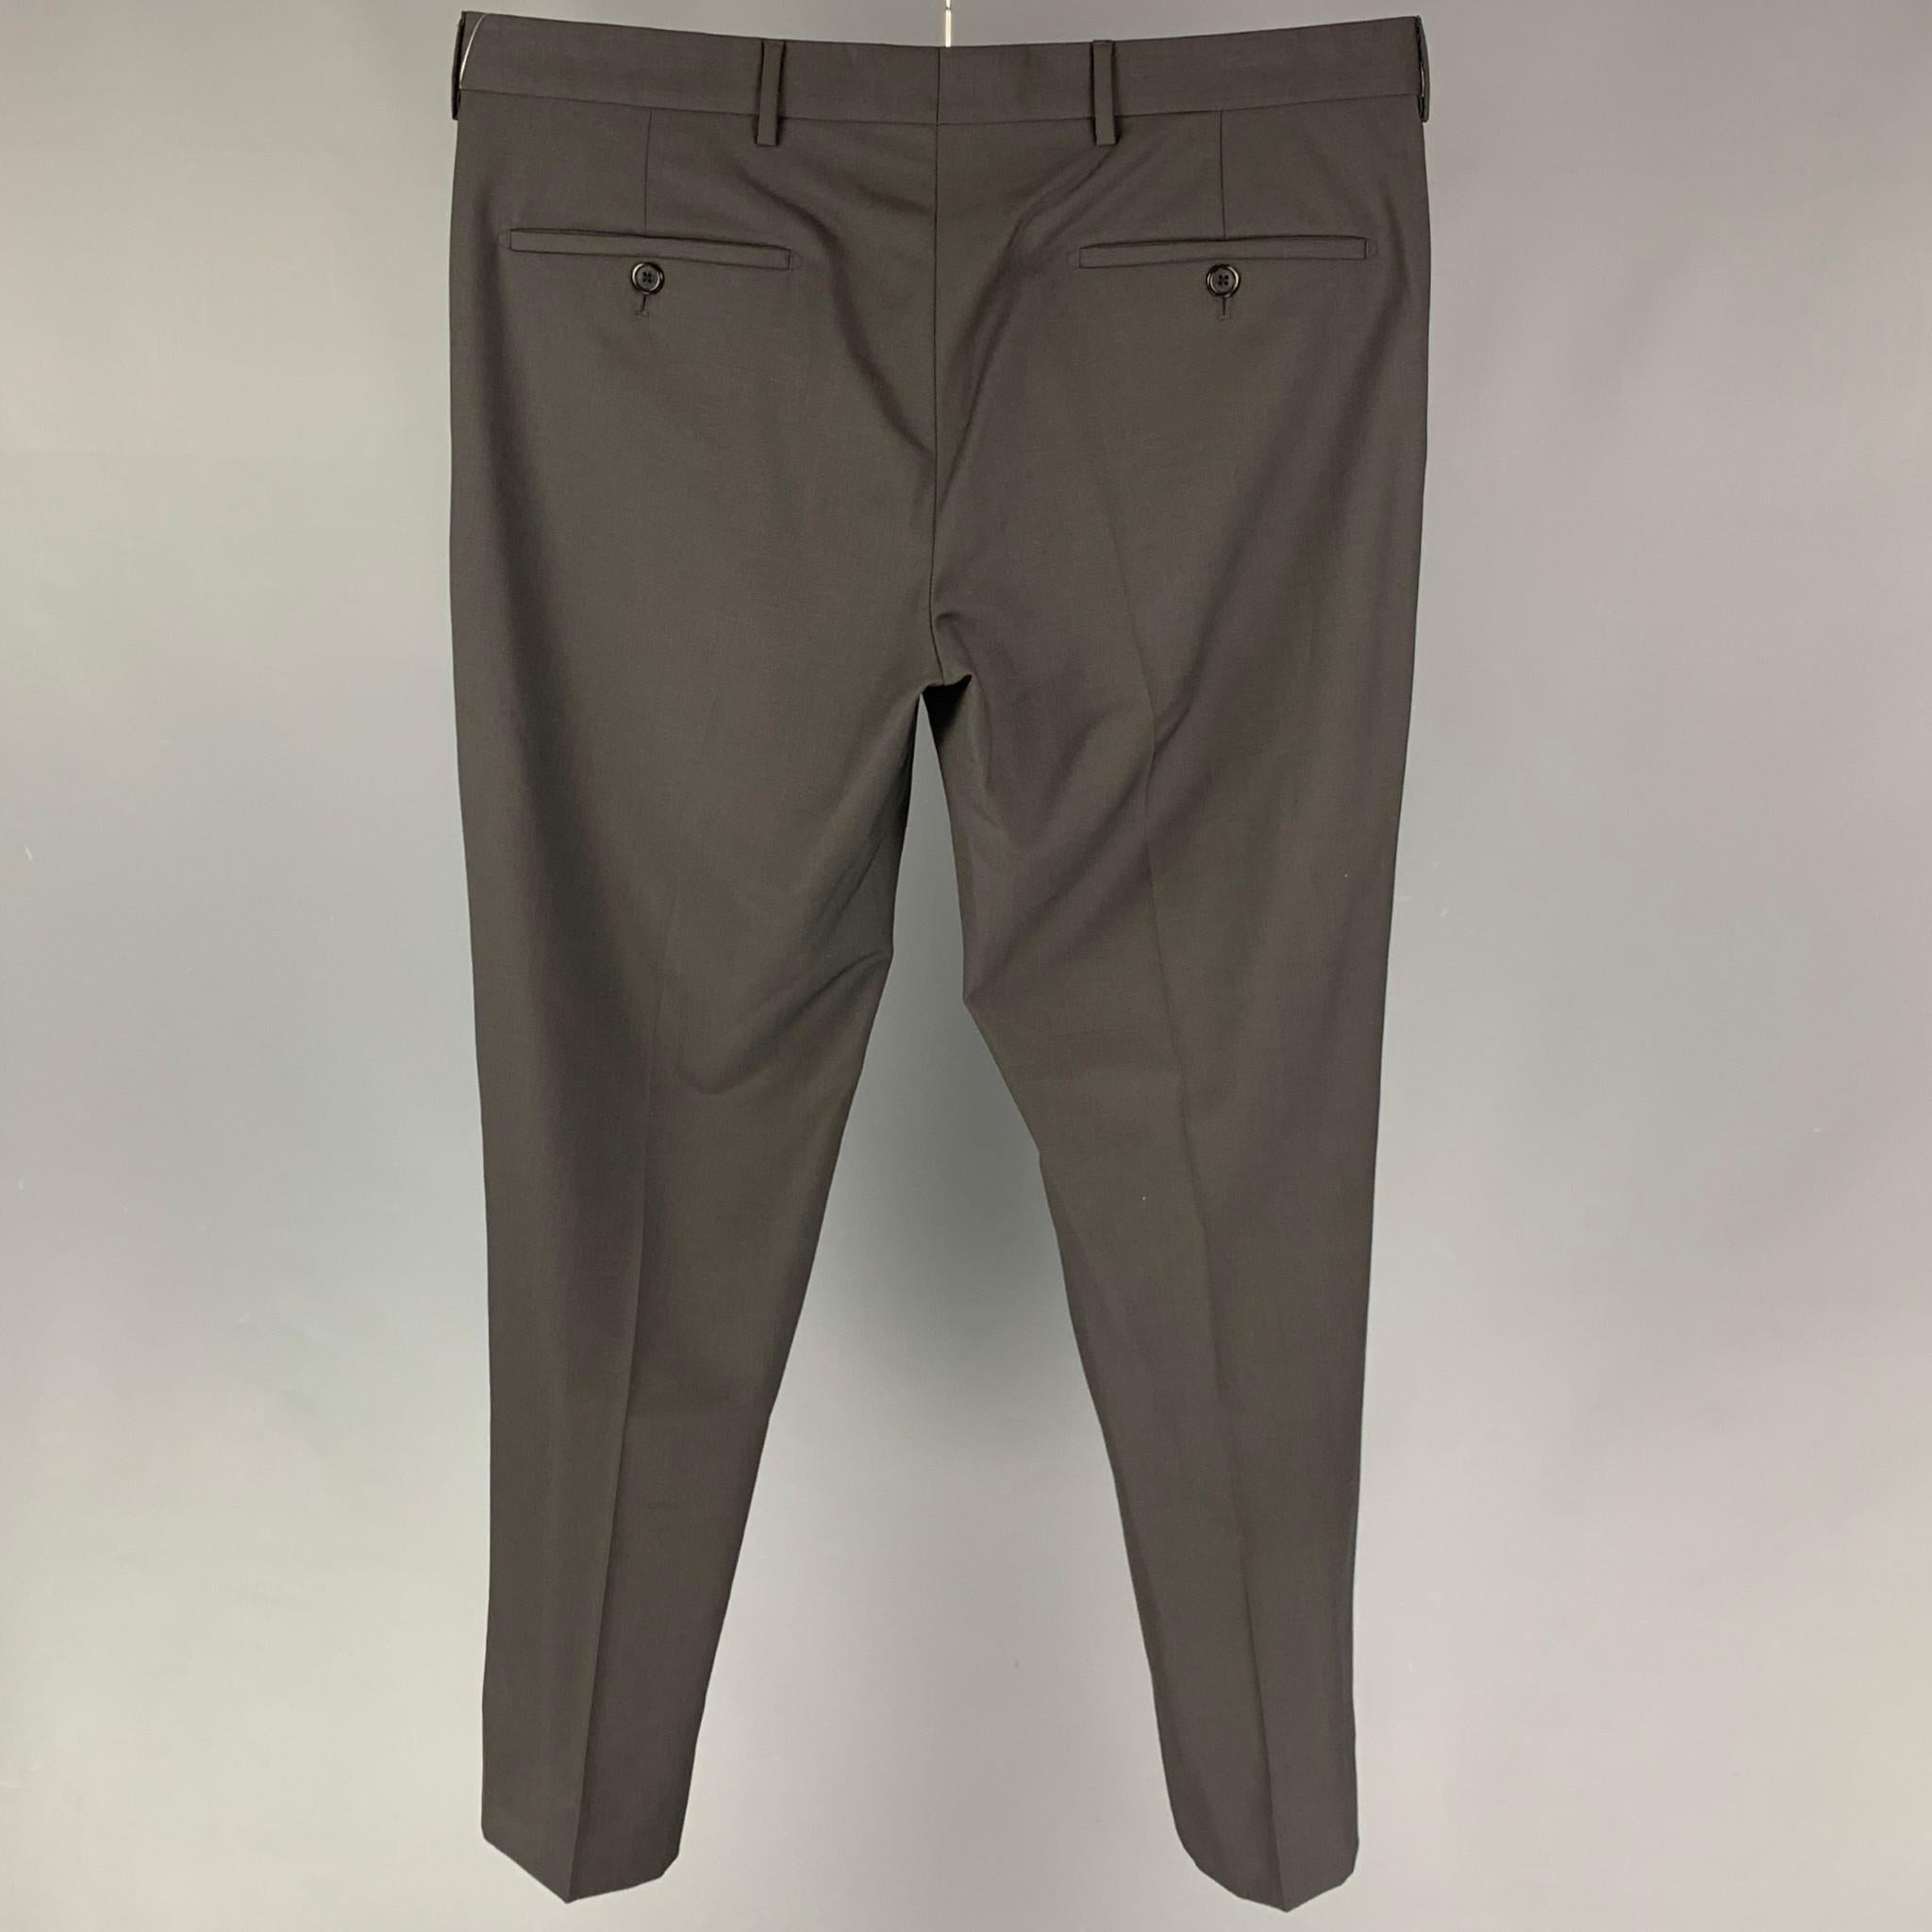 PRADA dress pants comes in a charcoal wool  featuring a flat front, front tab, and a button fly closure. Made in Italy. 

Very Good Pre-Owned Condition.
Marked: 50

Measurements:

Waist: 34 in.
Rise: 10 in.
Inseam: 30 in. 